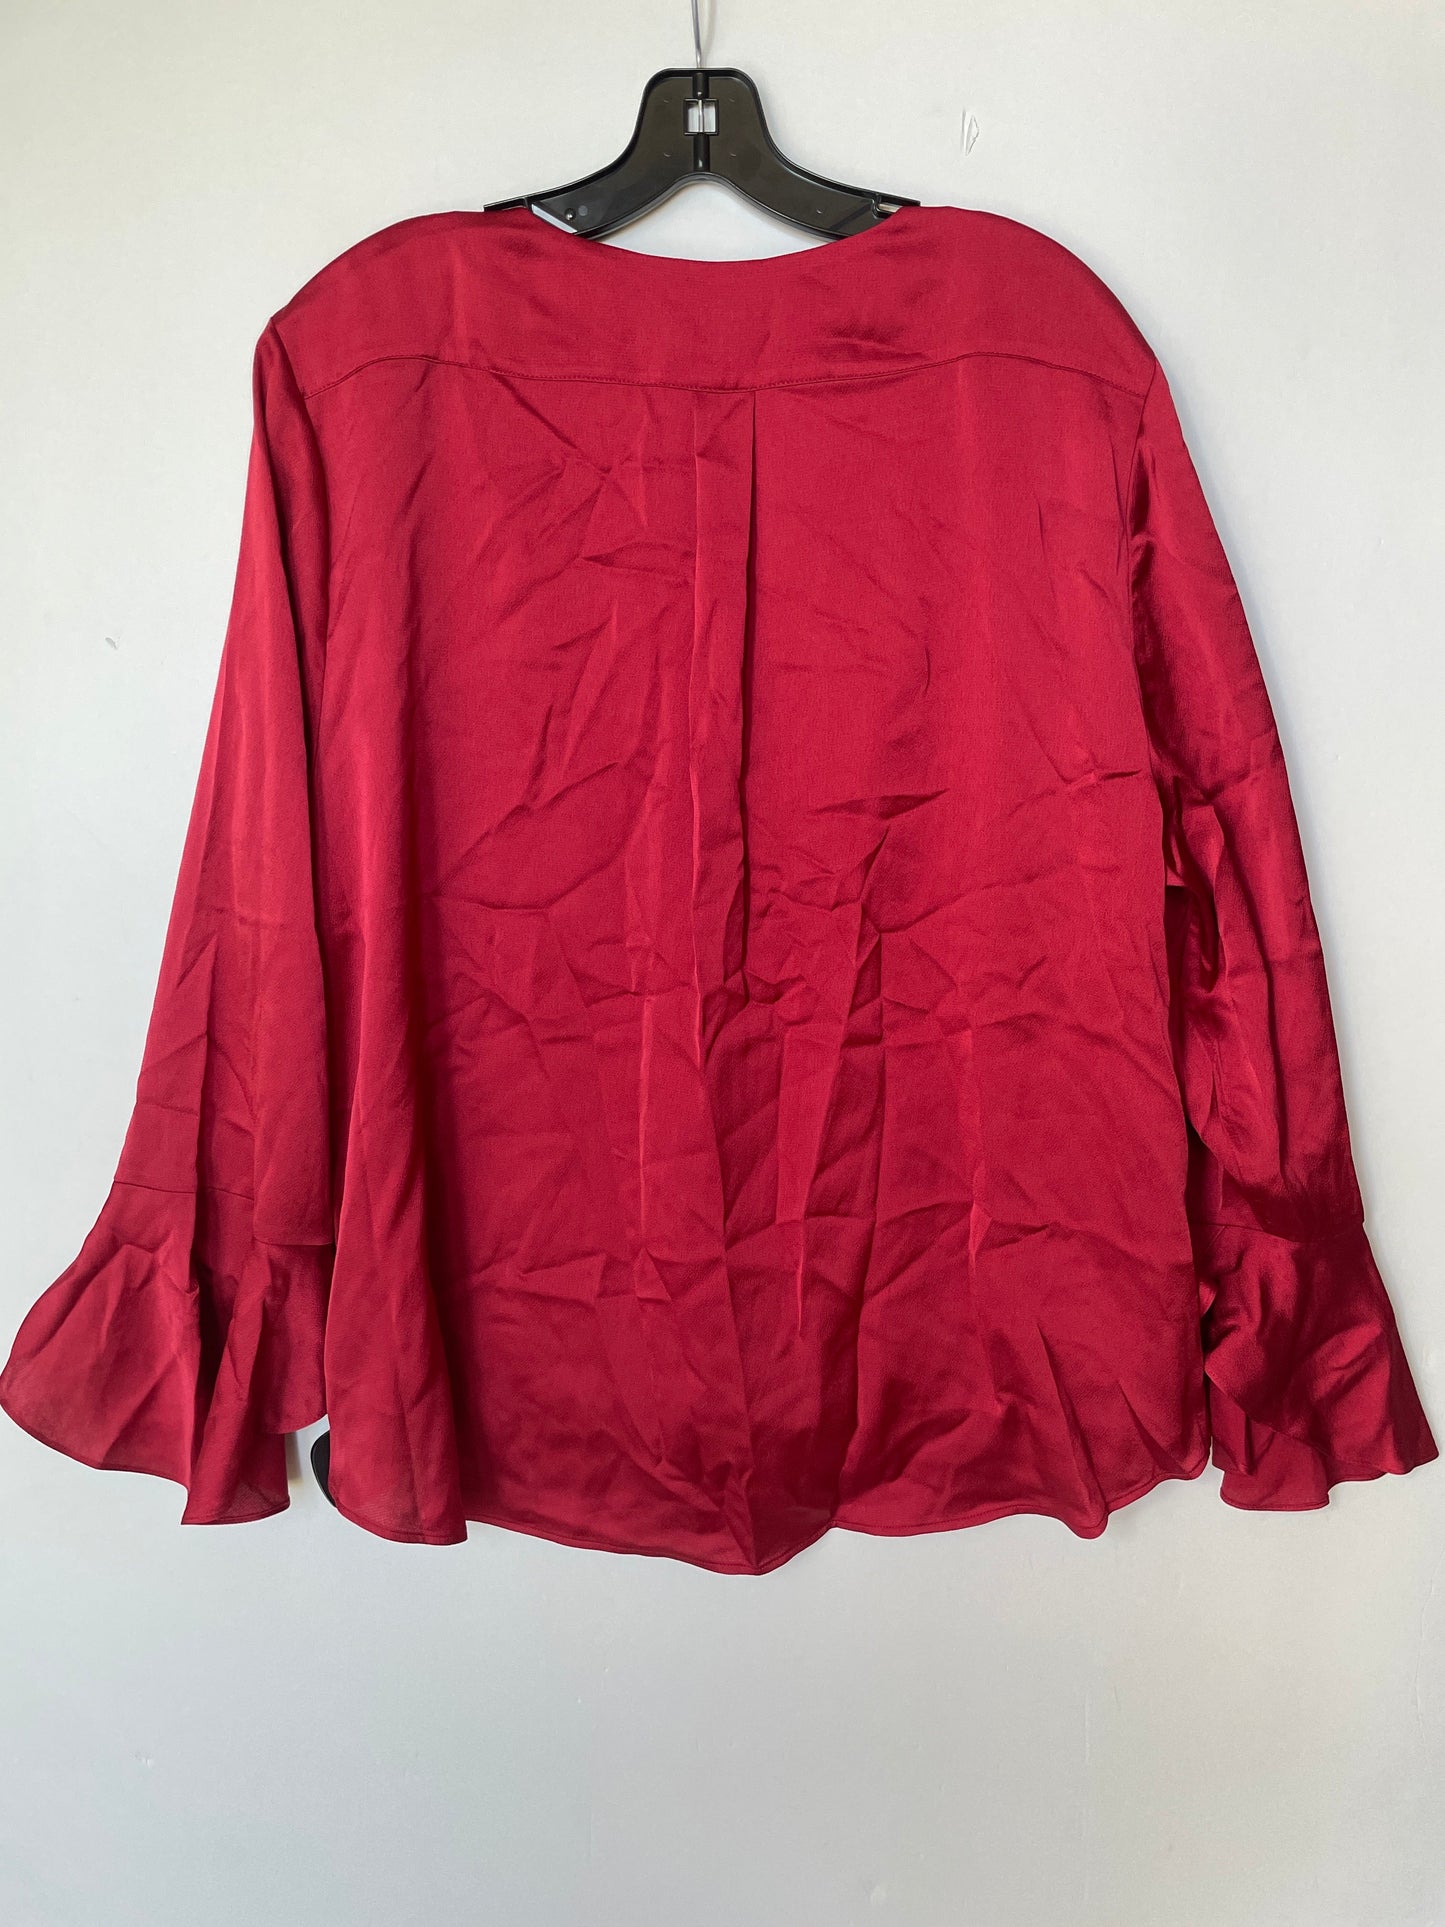 Red Top Long Sleeve Vince Camuto, Size Xxl